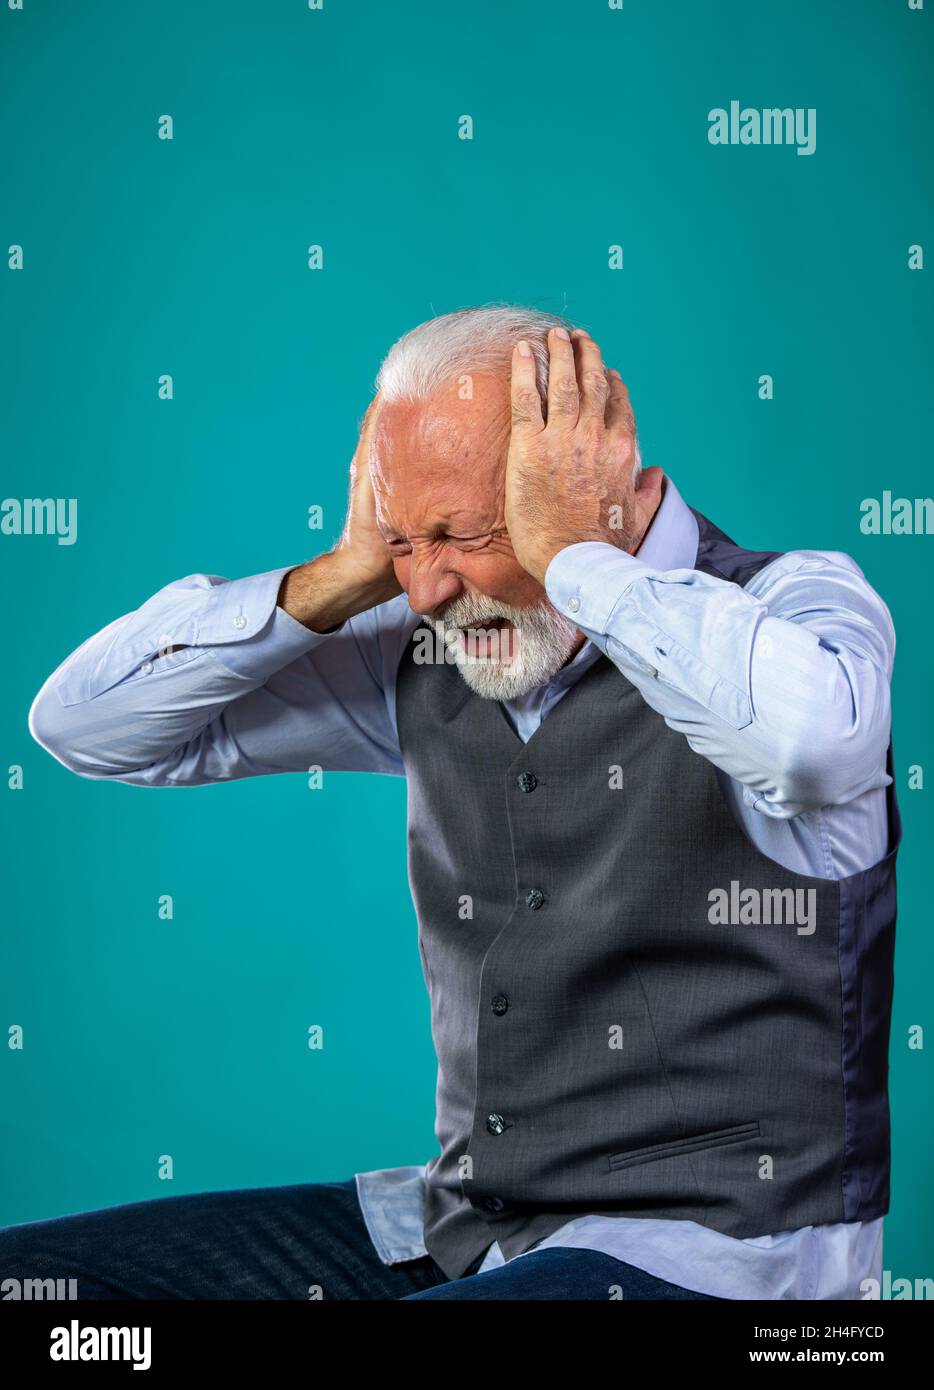 Frustrated old man with white hair and beard holding hands on ears and yelling, on blue background in studio Stock Photo